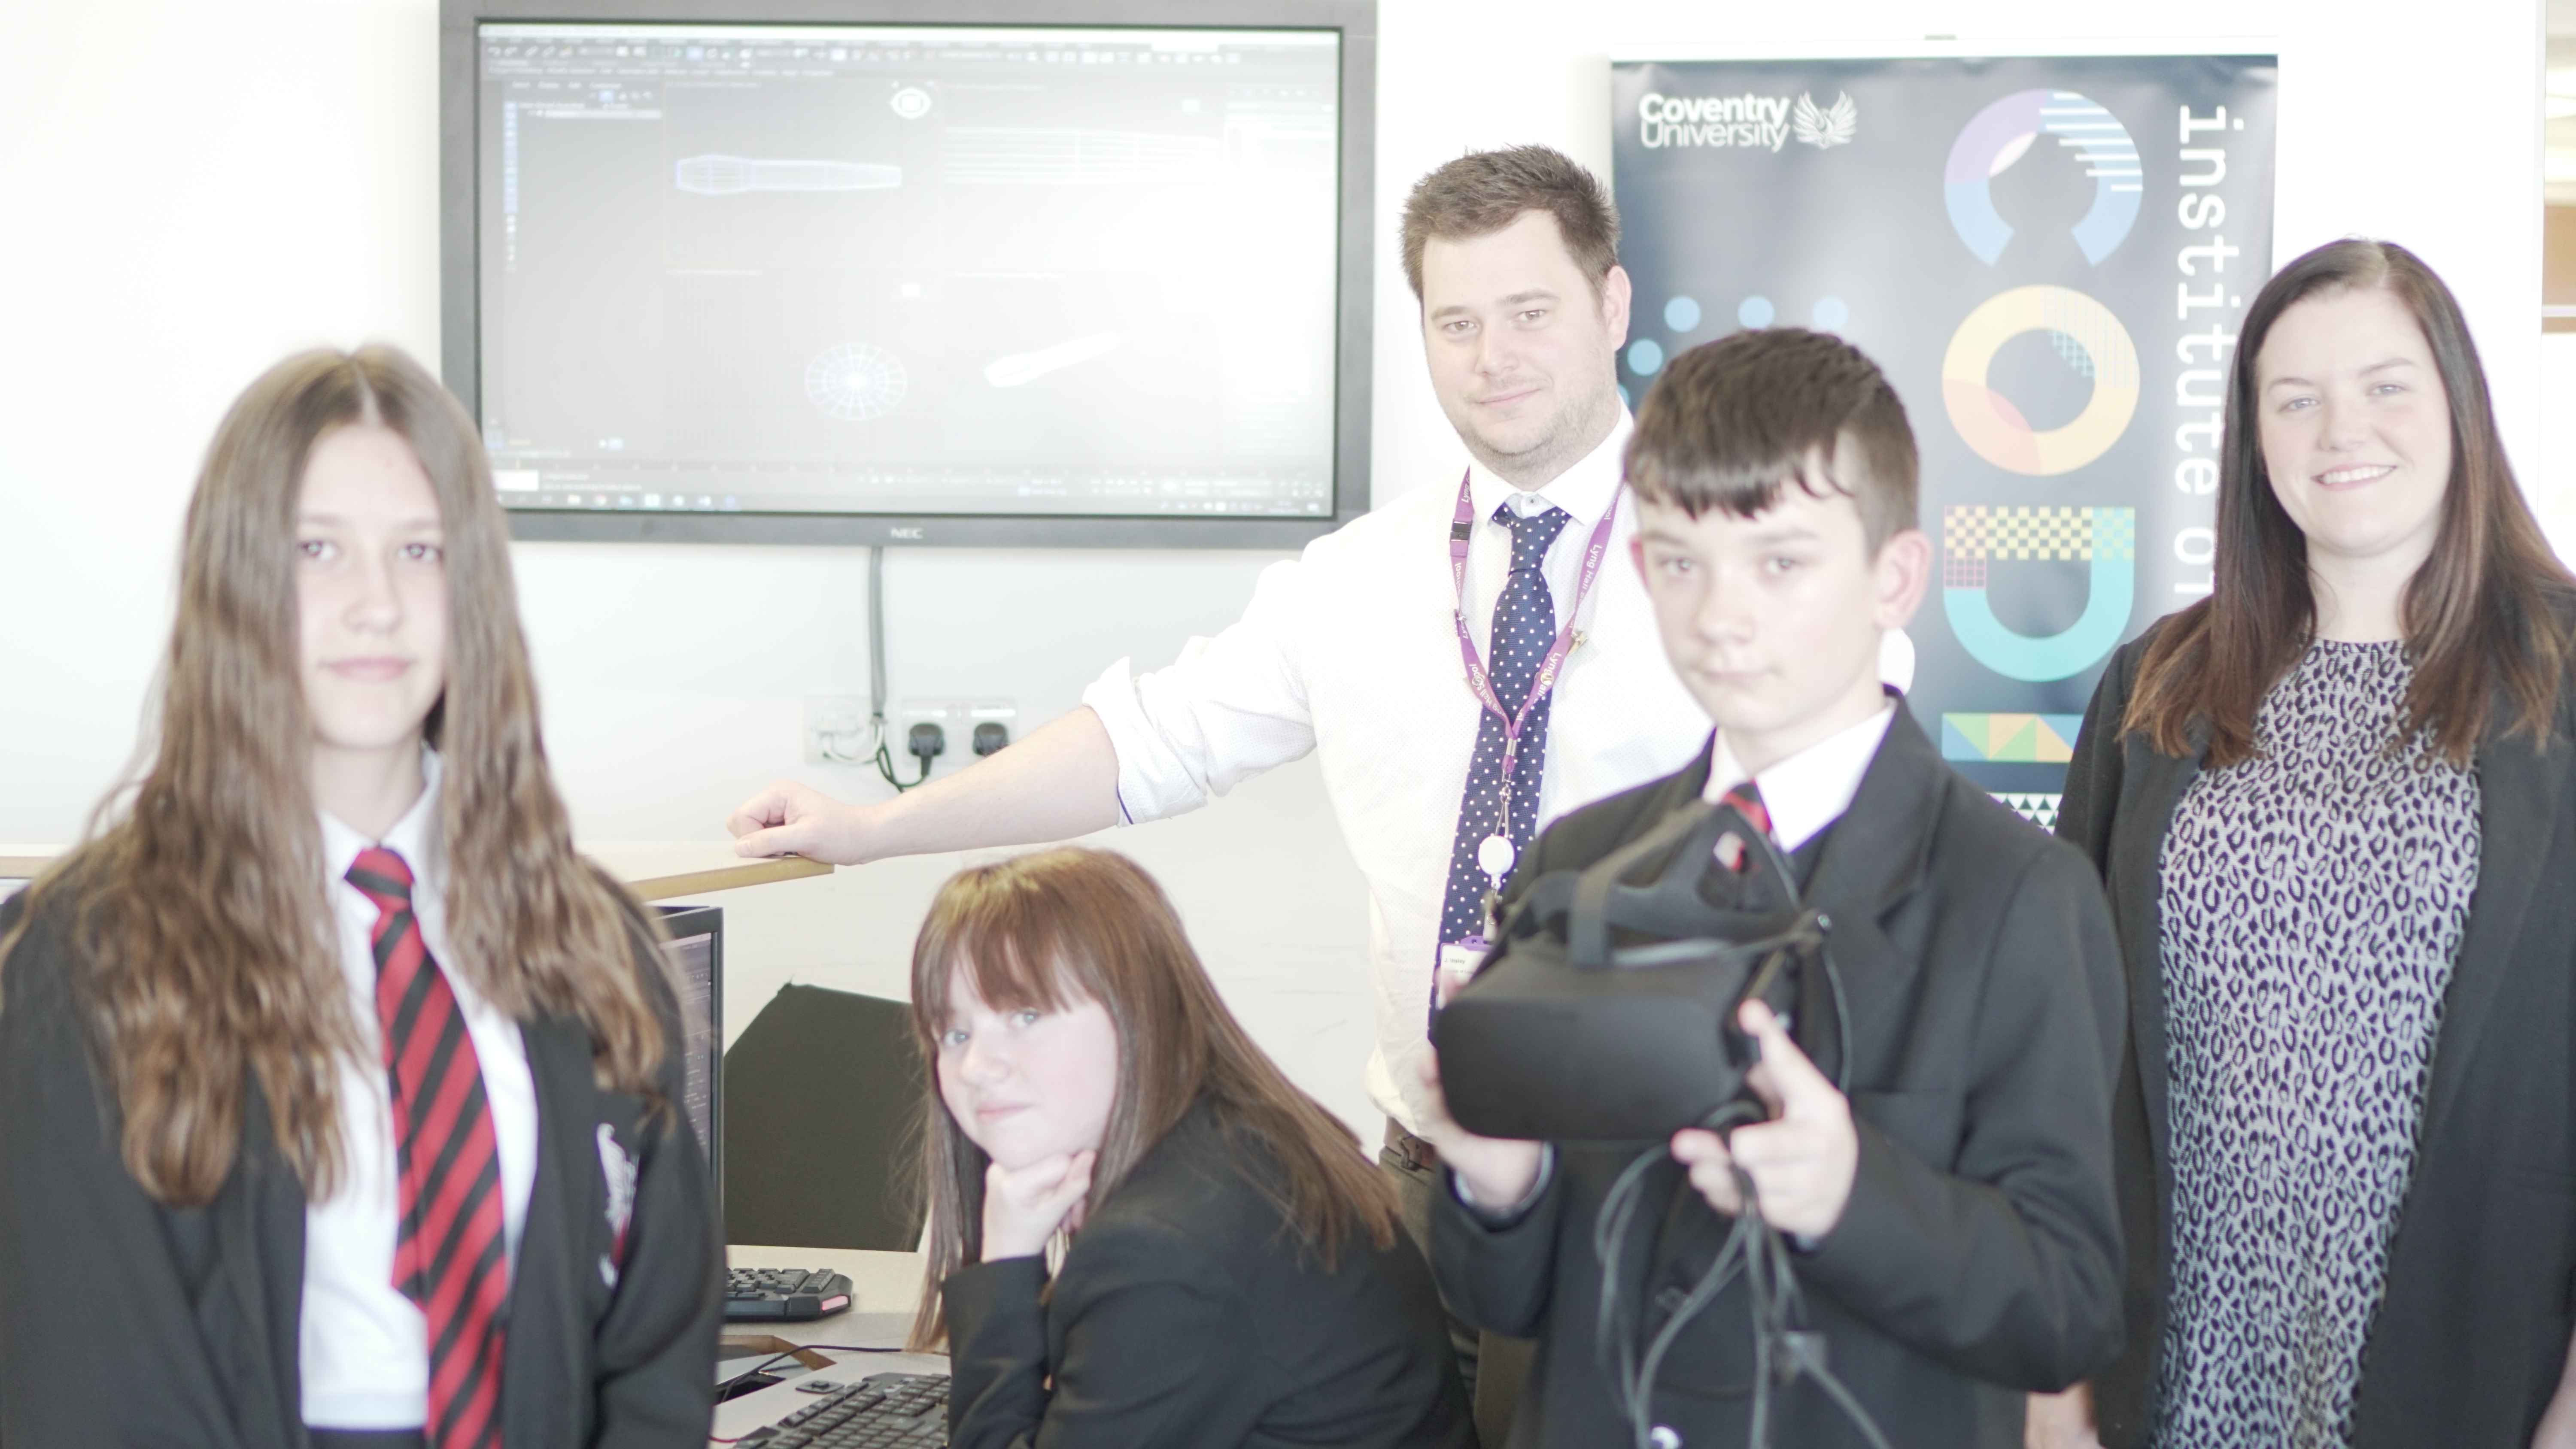 Lyng Hall students get hands on with VR technology at University visit